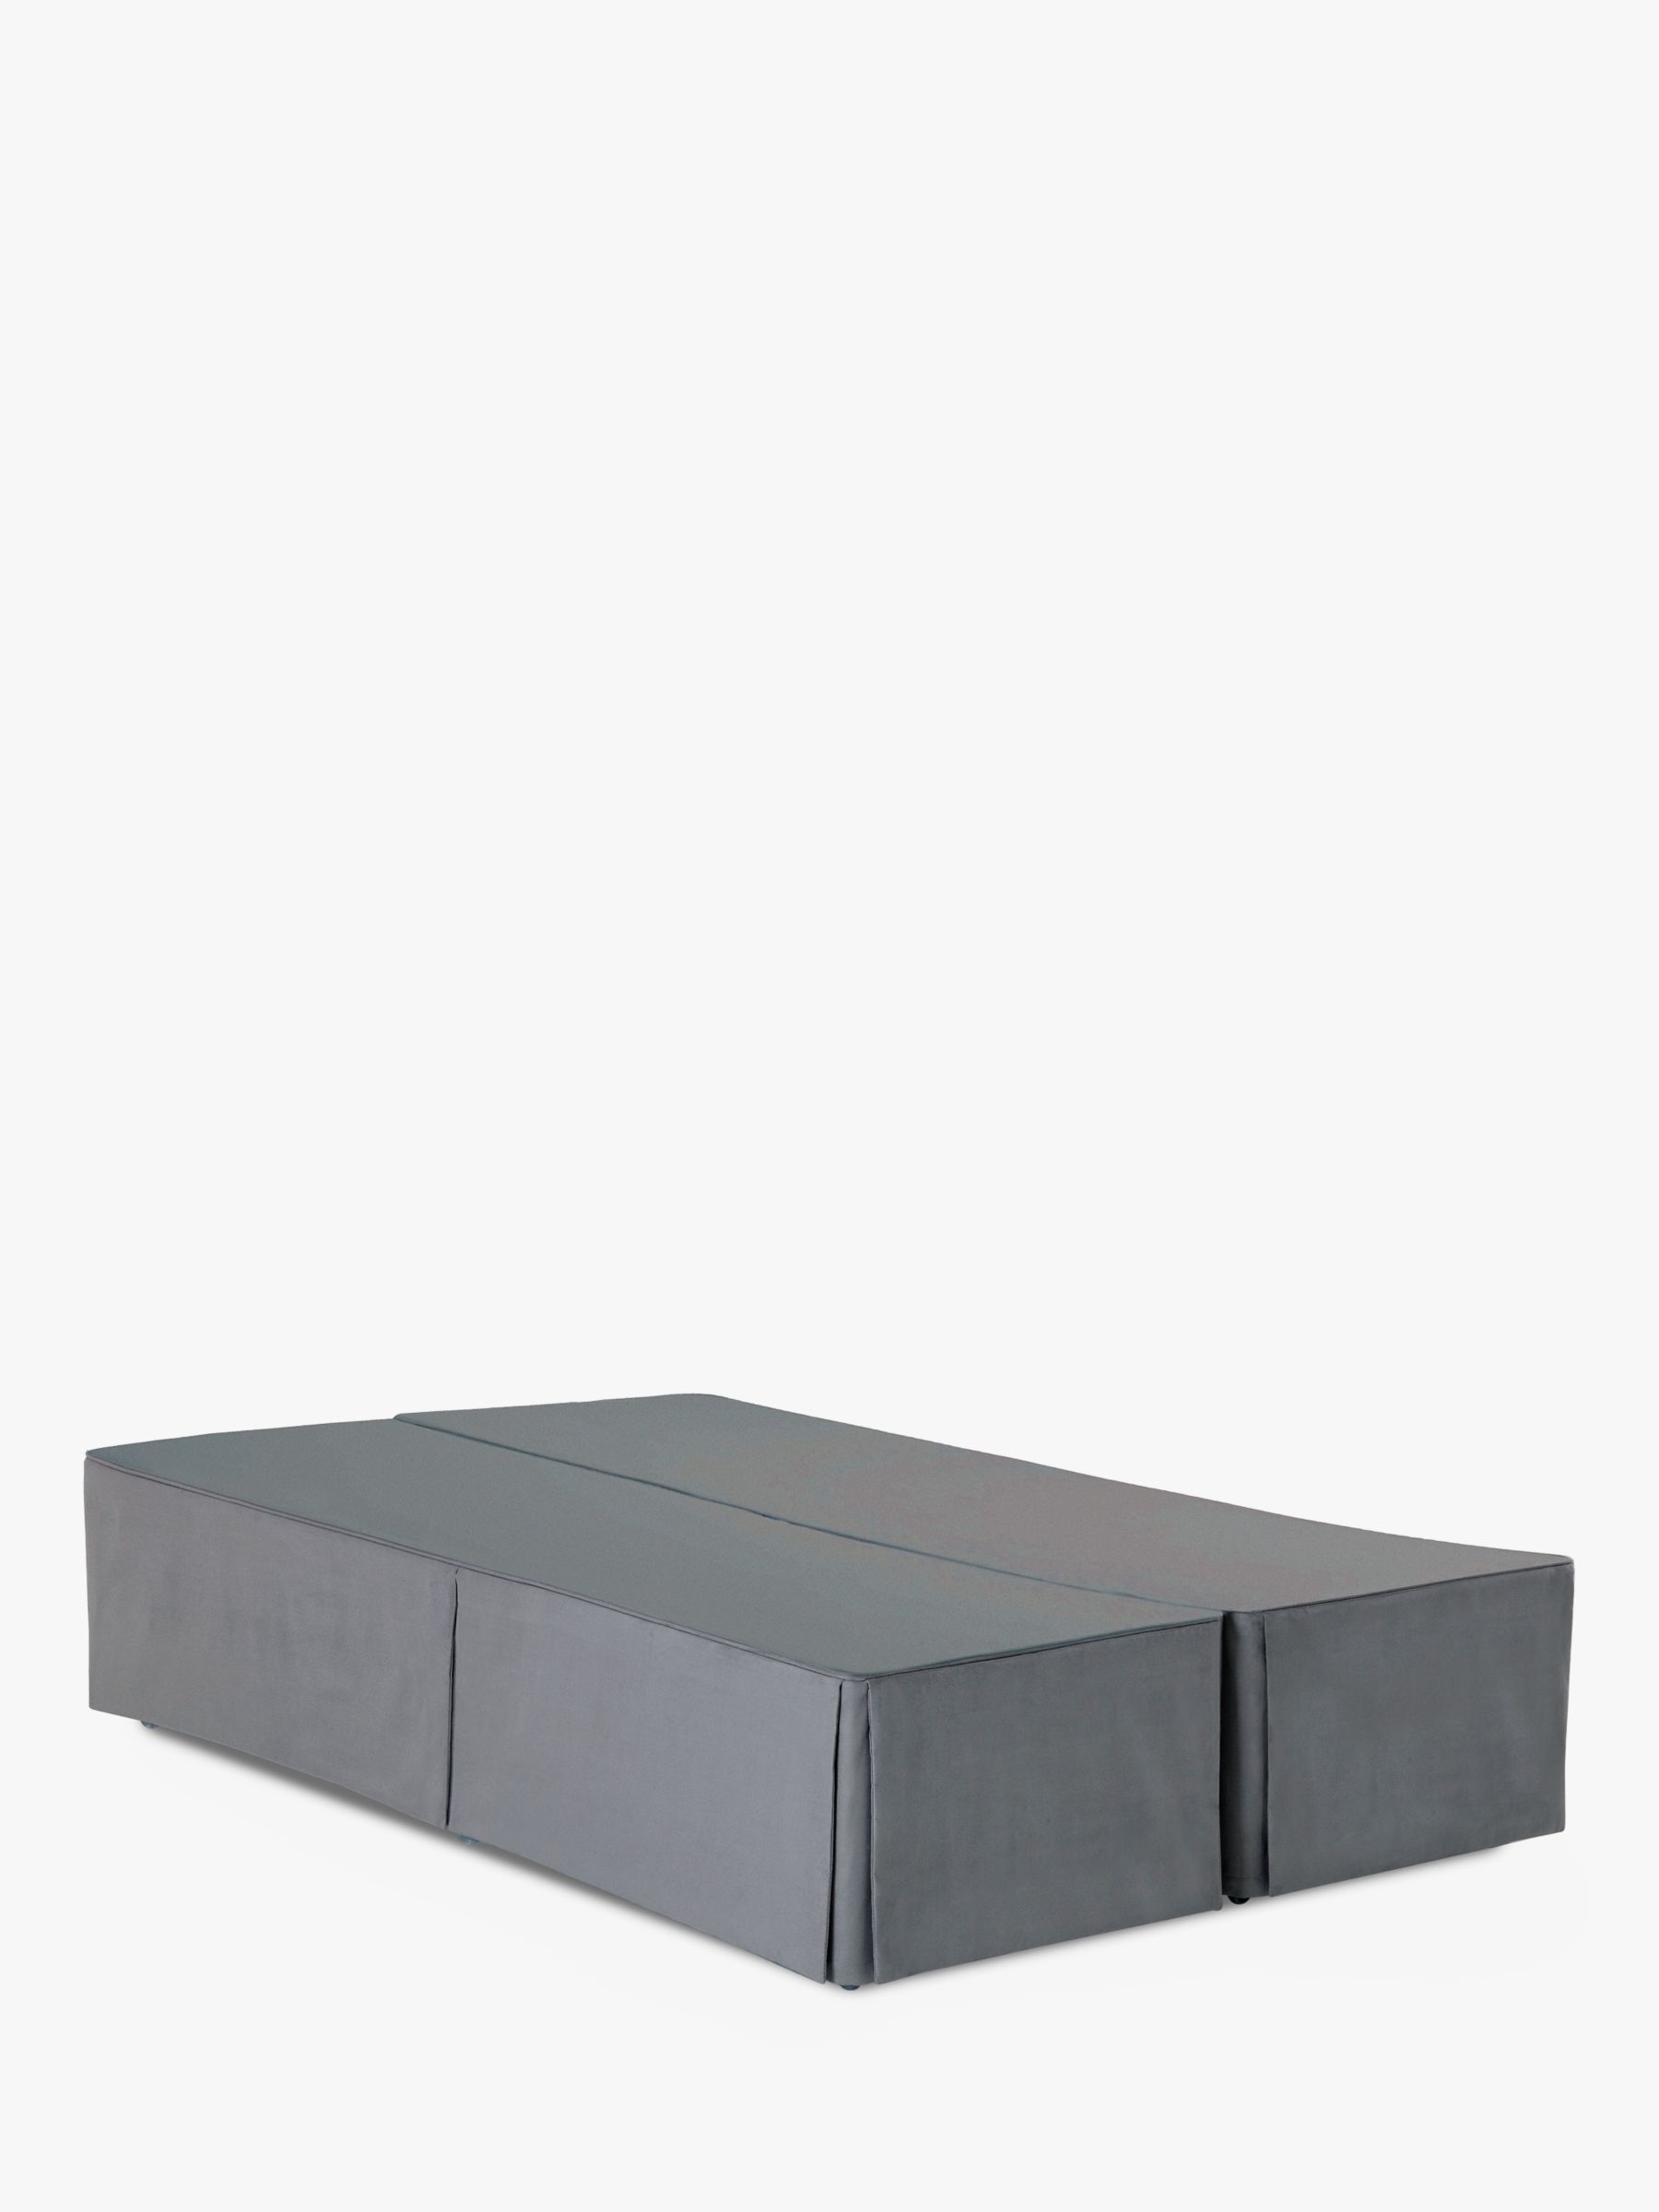 Photo of Hypnos hideaway storage upholstered divan base double imperio grey